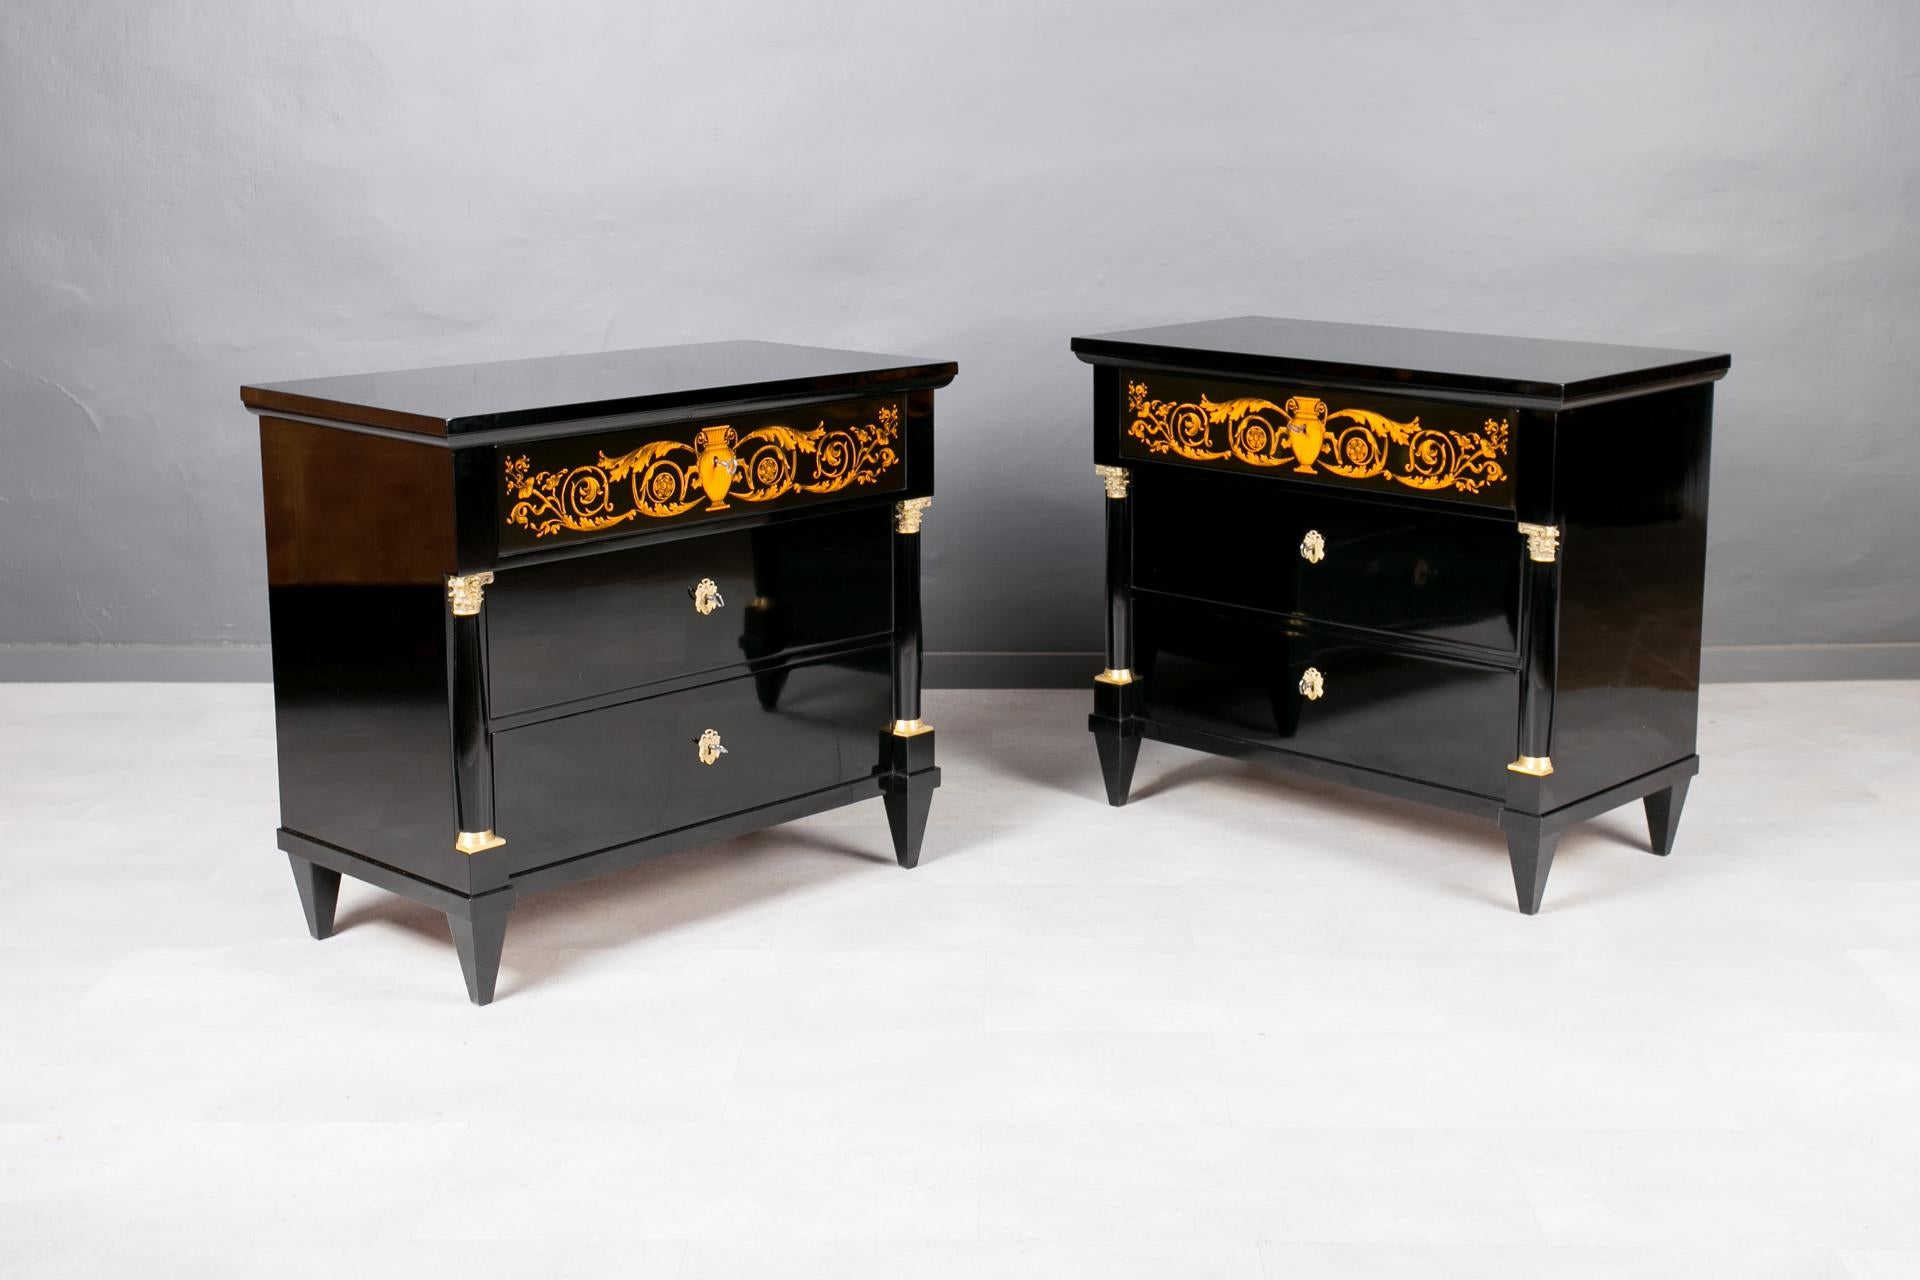 Polished Set of 2 Biedermeier Chests of Drawers, Austria, 19th Century